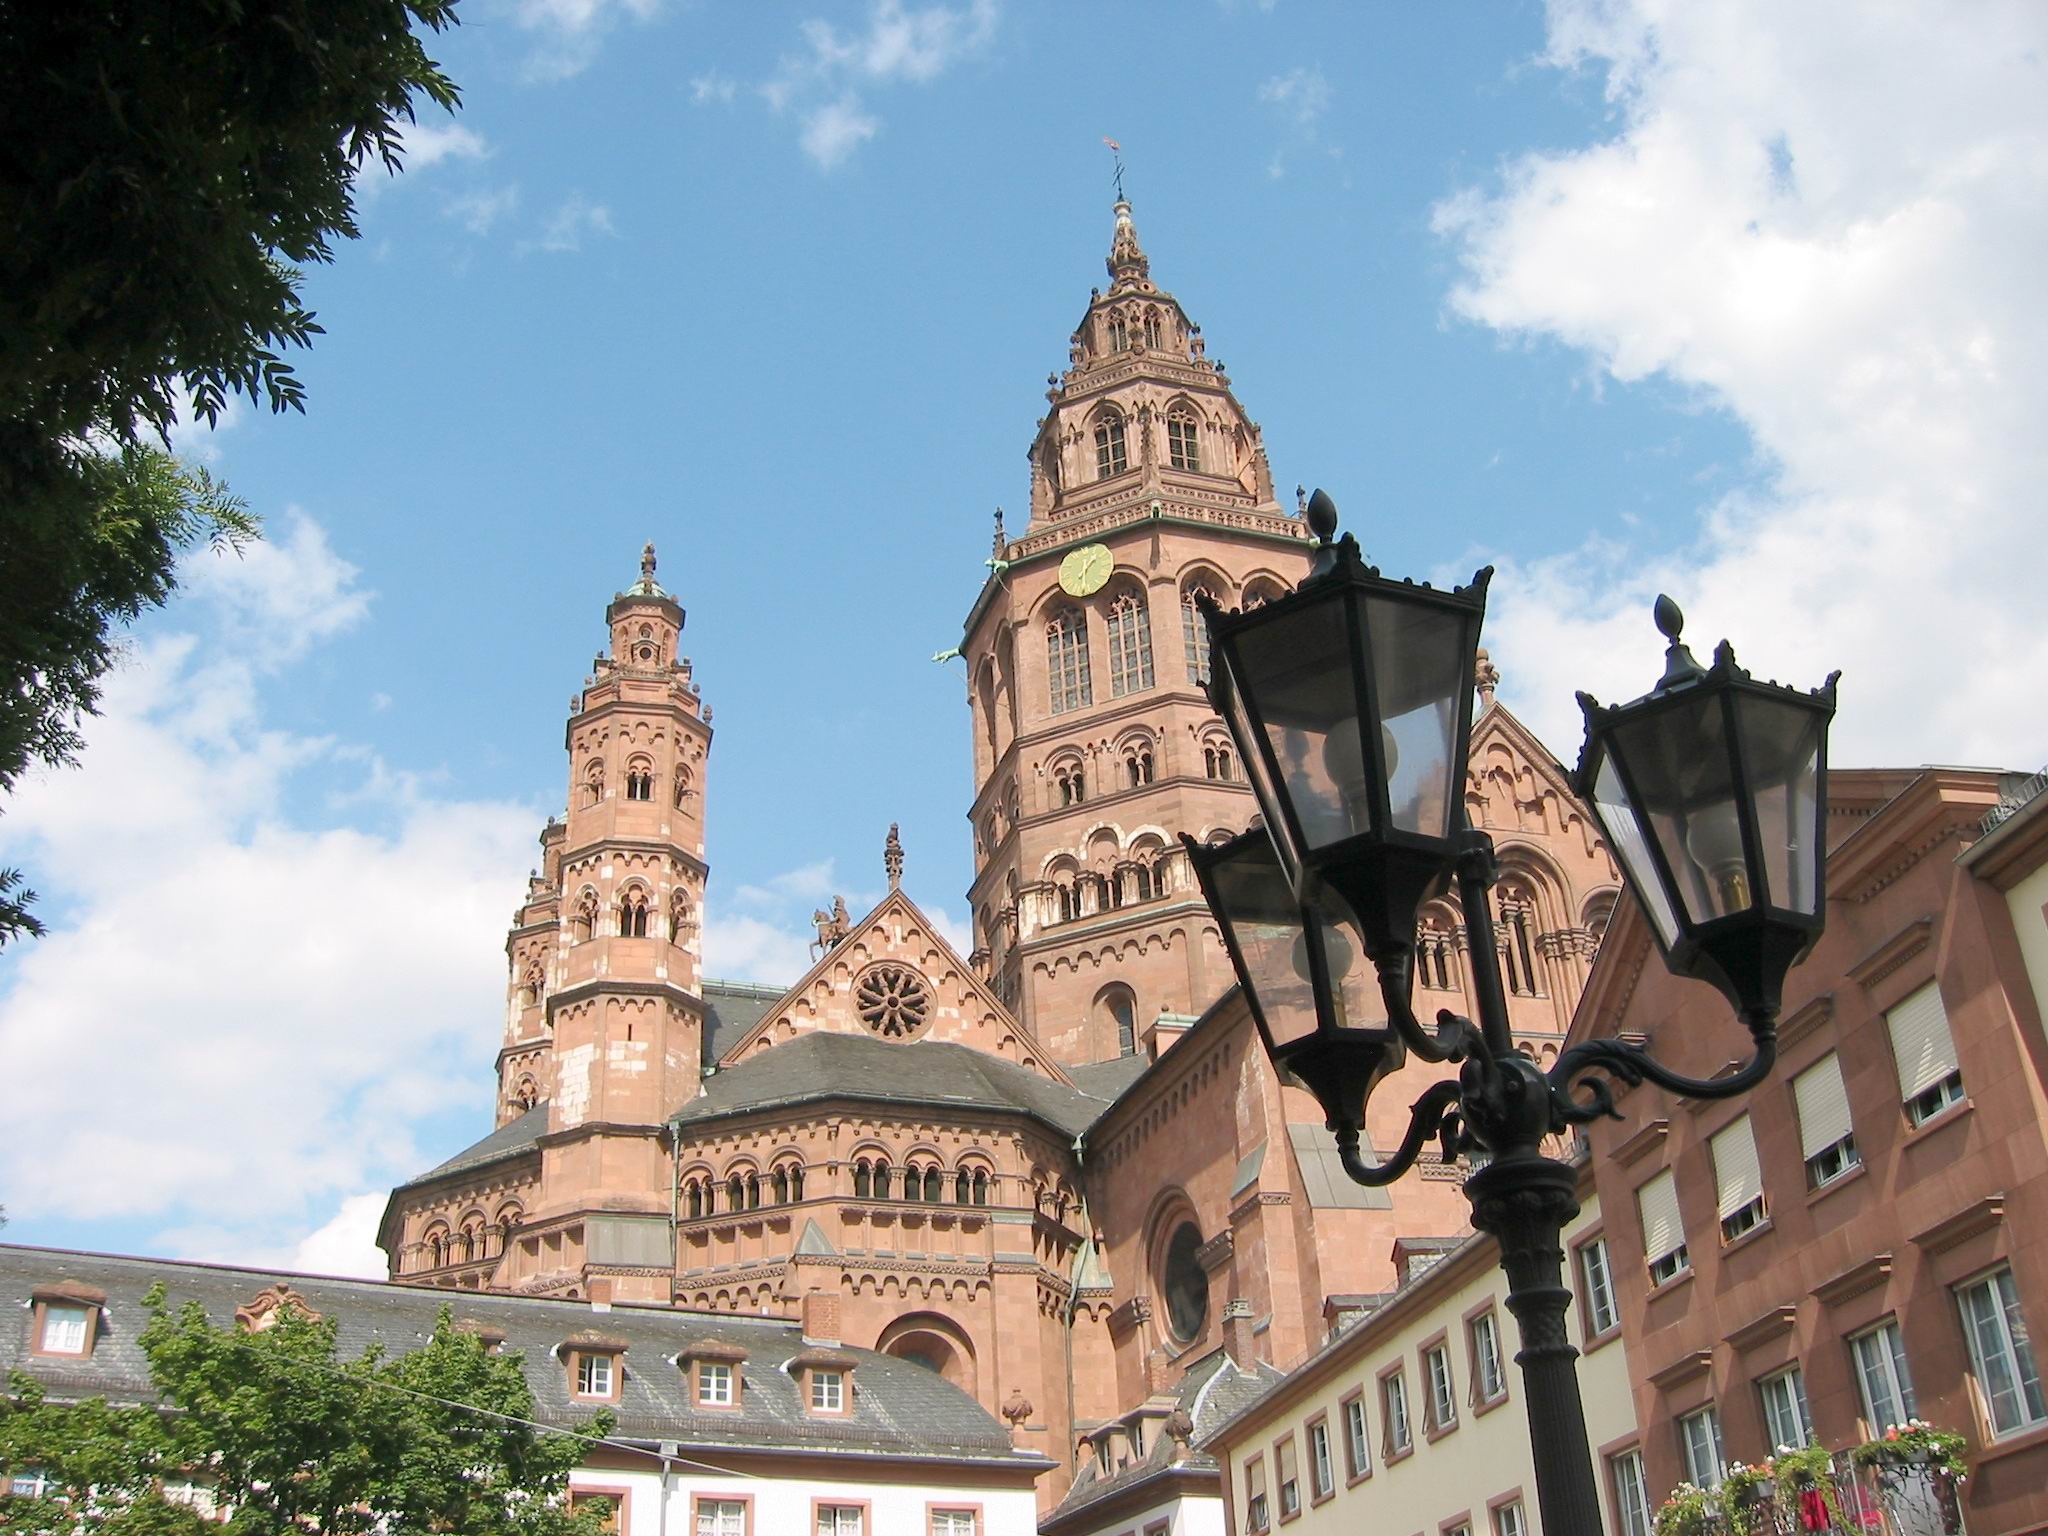 The red sandstone cathedral in Mainz is a fresh contrast to most European architecture.